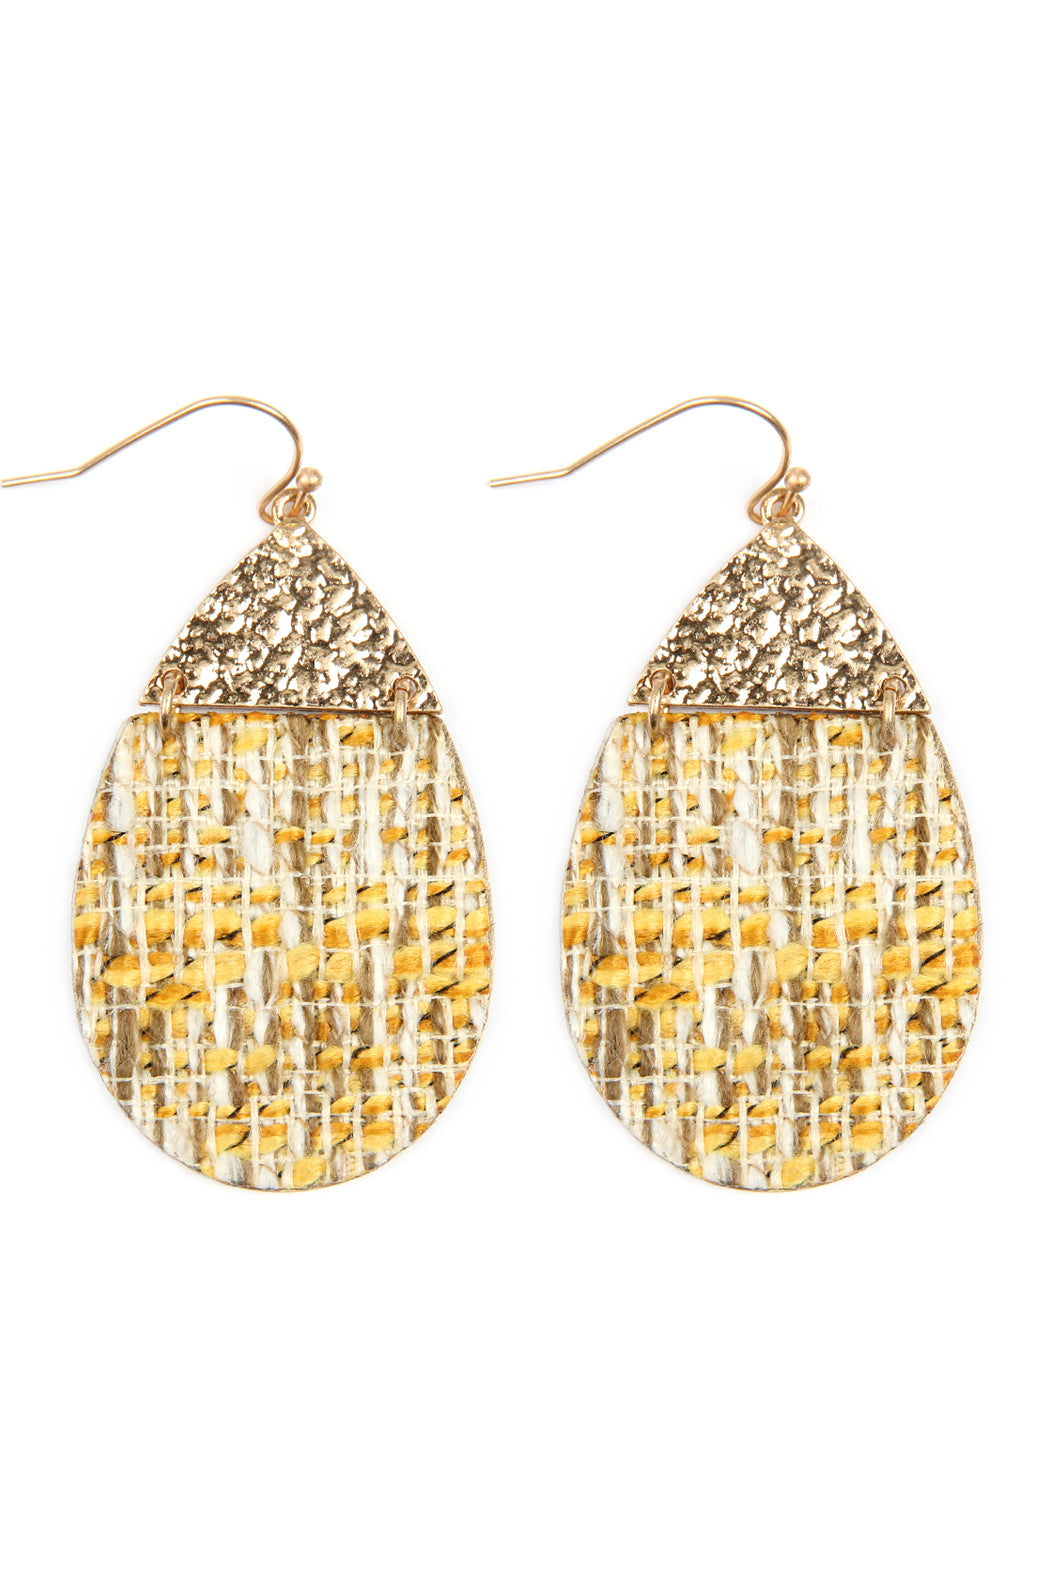 TWEED CASTING EARRINGS (NOW $1.25 ONLY!)